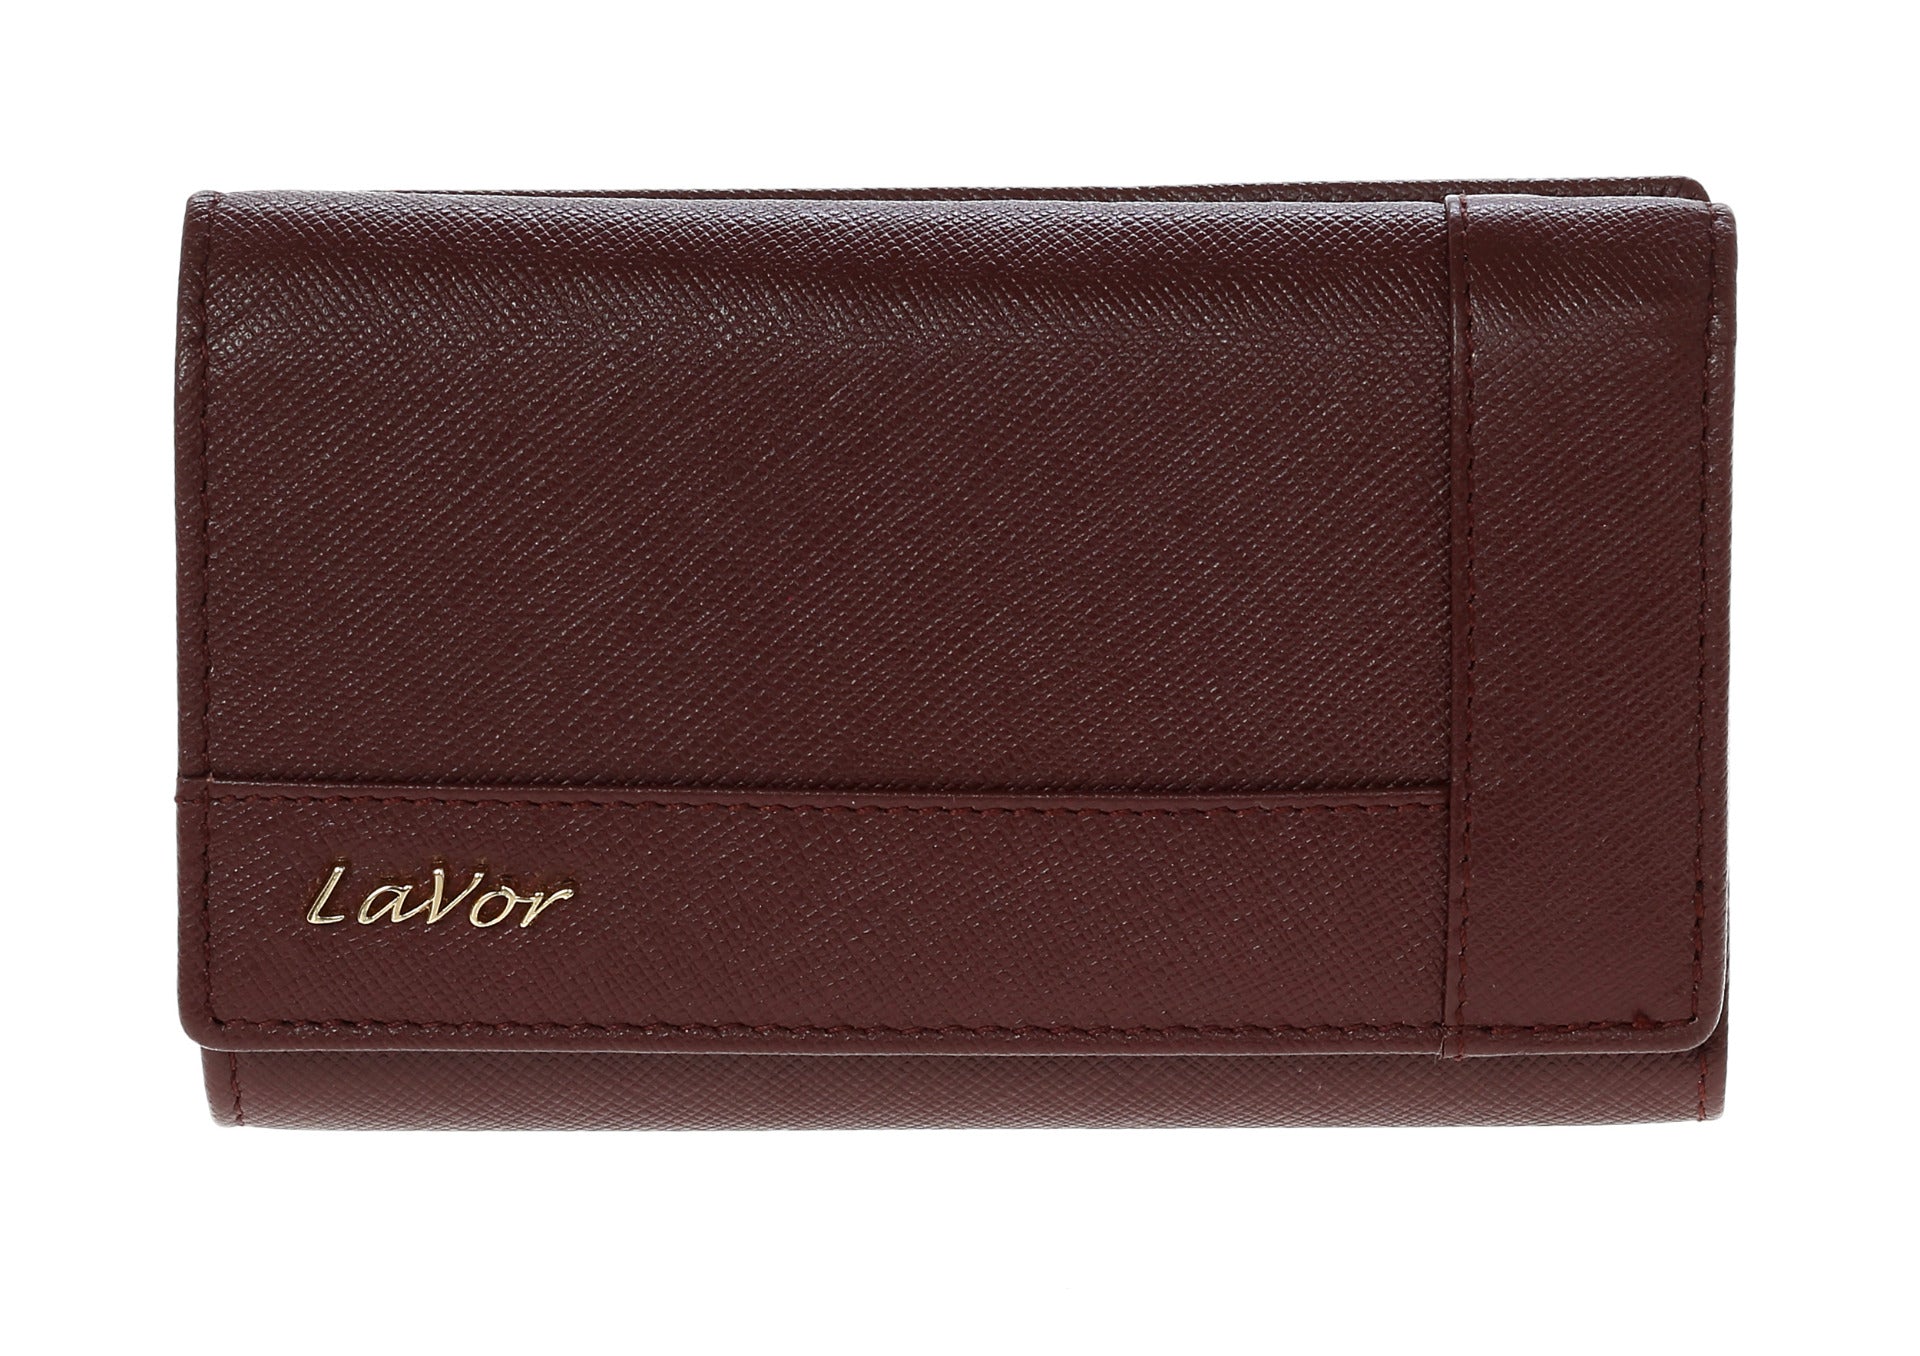 Leather wallet in burgundy colour. 5994